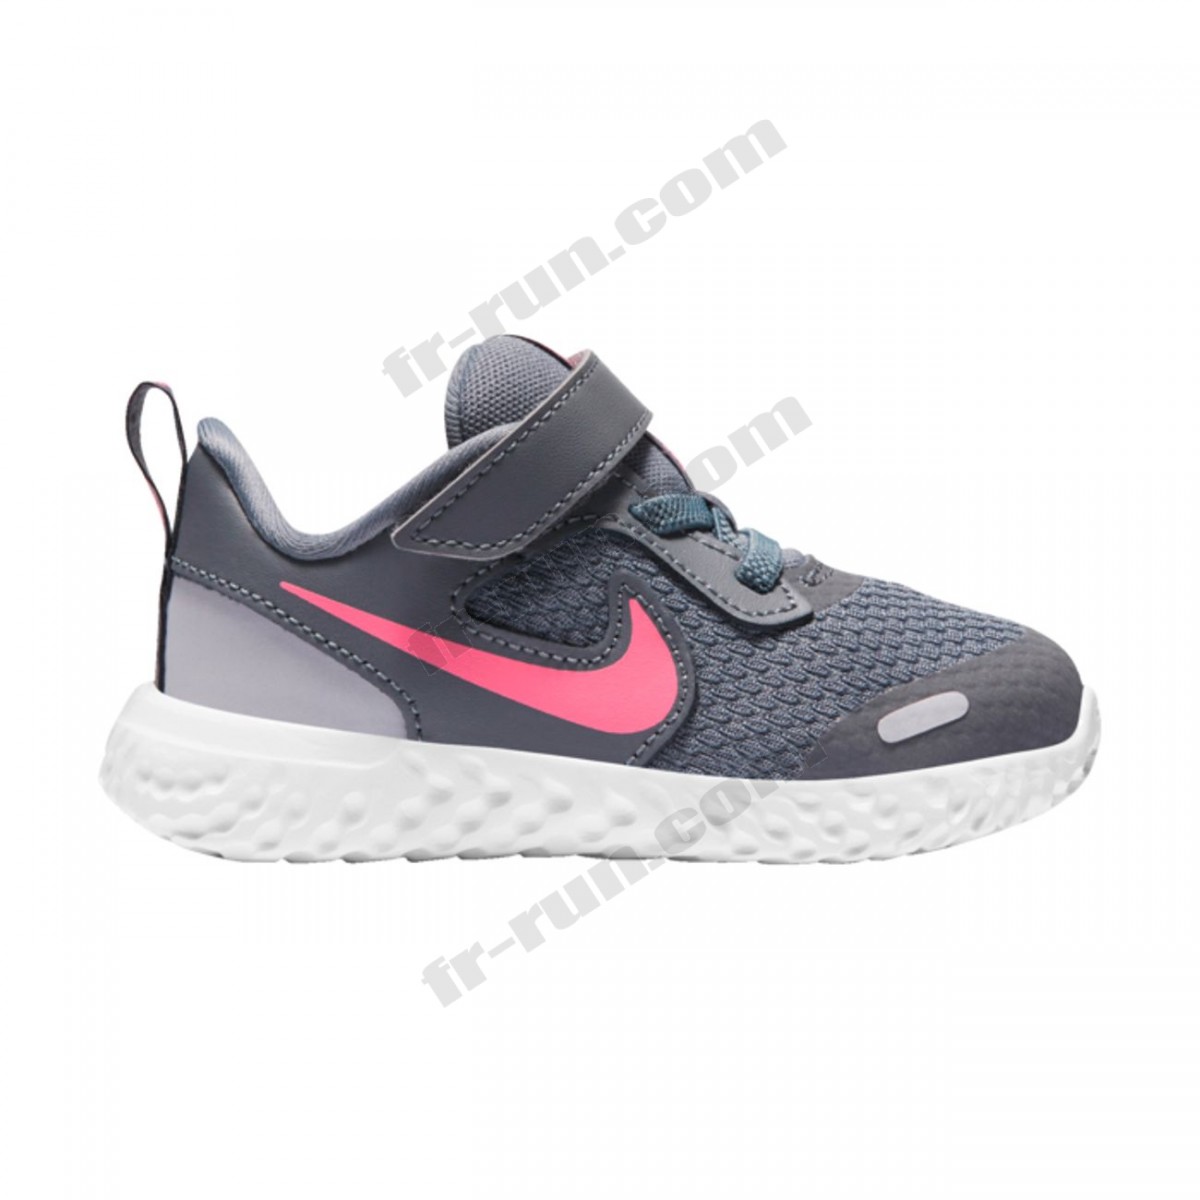 Nike/CHAUSSURES BASSES Loisirs enfant NIKE REVOLUTION 5 VLC √ Nouveau style √ Soldes - Nike/CHAUSSURES BASSES Loisirs enfant NIKE REVOLUTION 5 VLC √ Nouveau style √ Soldes